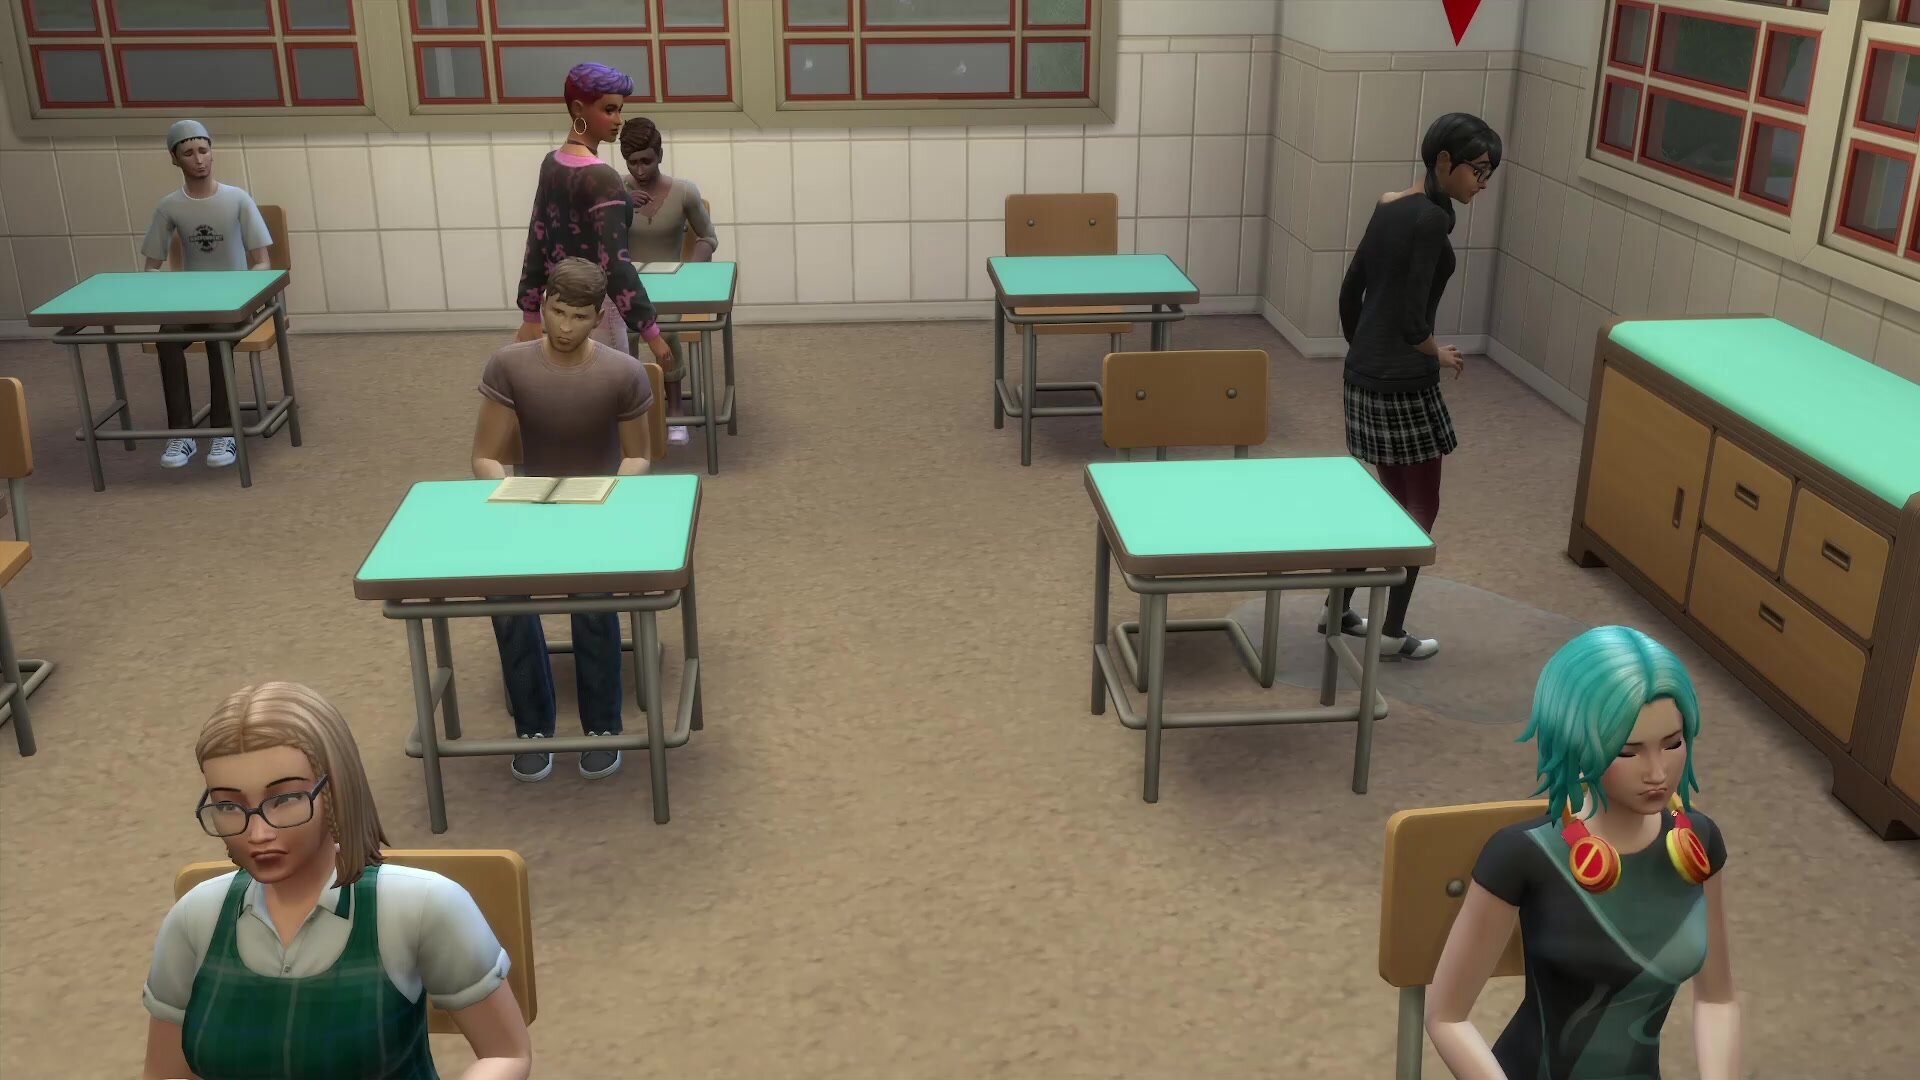 Cute nerdy sims4 girl pees pants in the middle of class